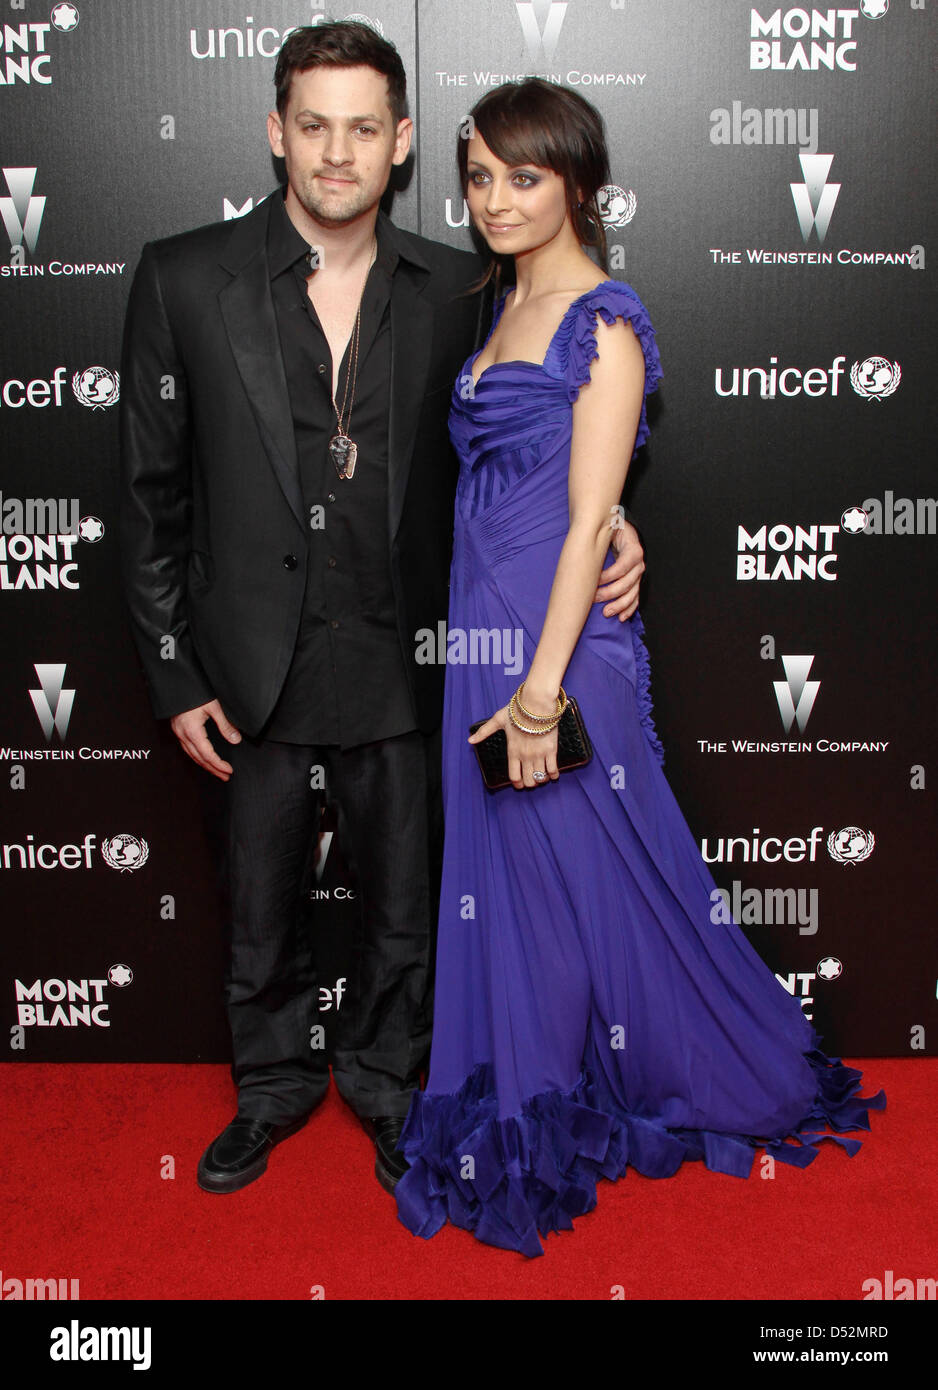 Musician Joel Madden and Nicole Richie arrive at the Montblanc Charity Cocktail hosted by The Weinstein Company to benefit UNICEF held at Soho House in Los Angeles, USA, 06 March 2010. Photo: Hubert Boesl Stock Photo